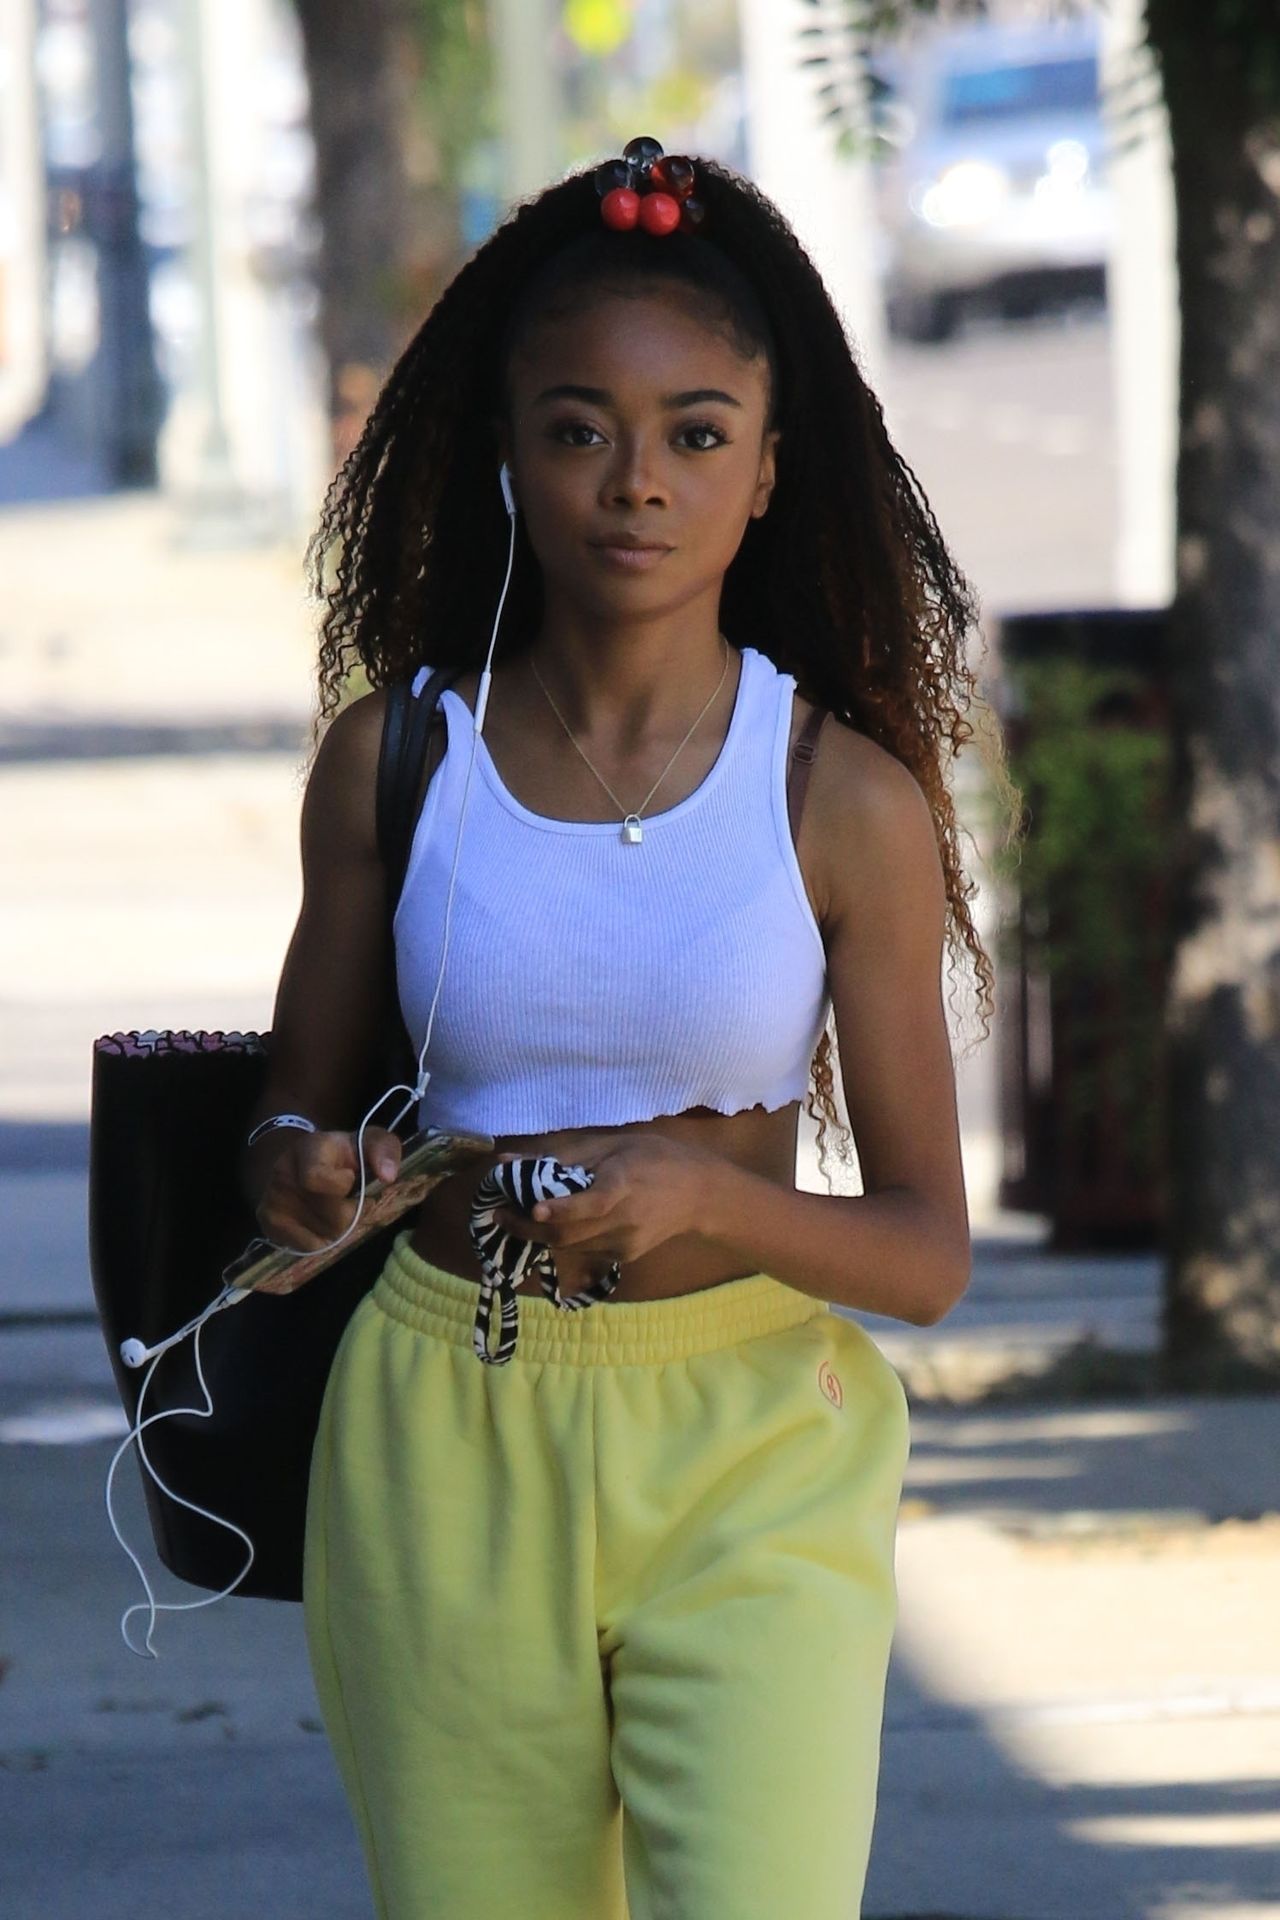 Skai Jackson Walks in With a Matching Postmates Delivery Cart (51 Photos)